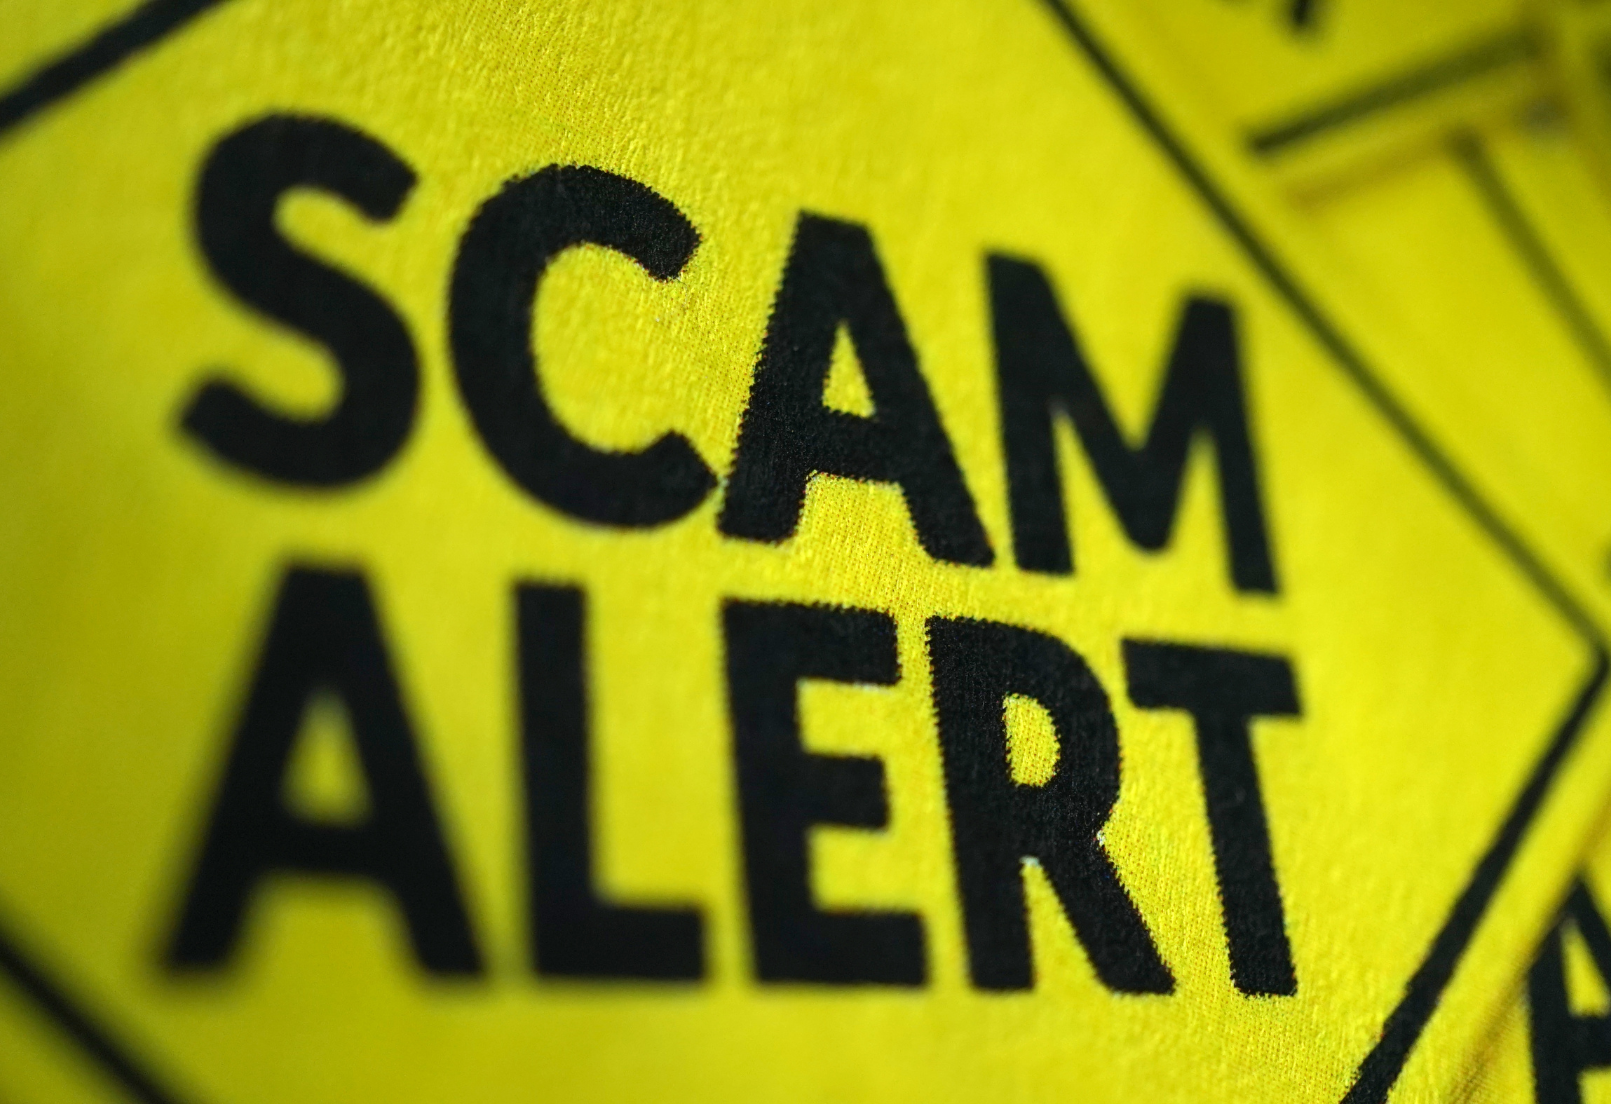 Be Aware of the “Overpayment Scam”